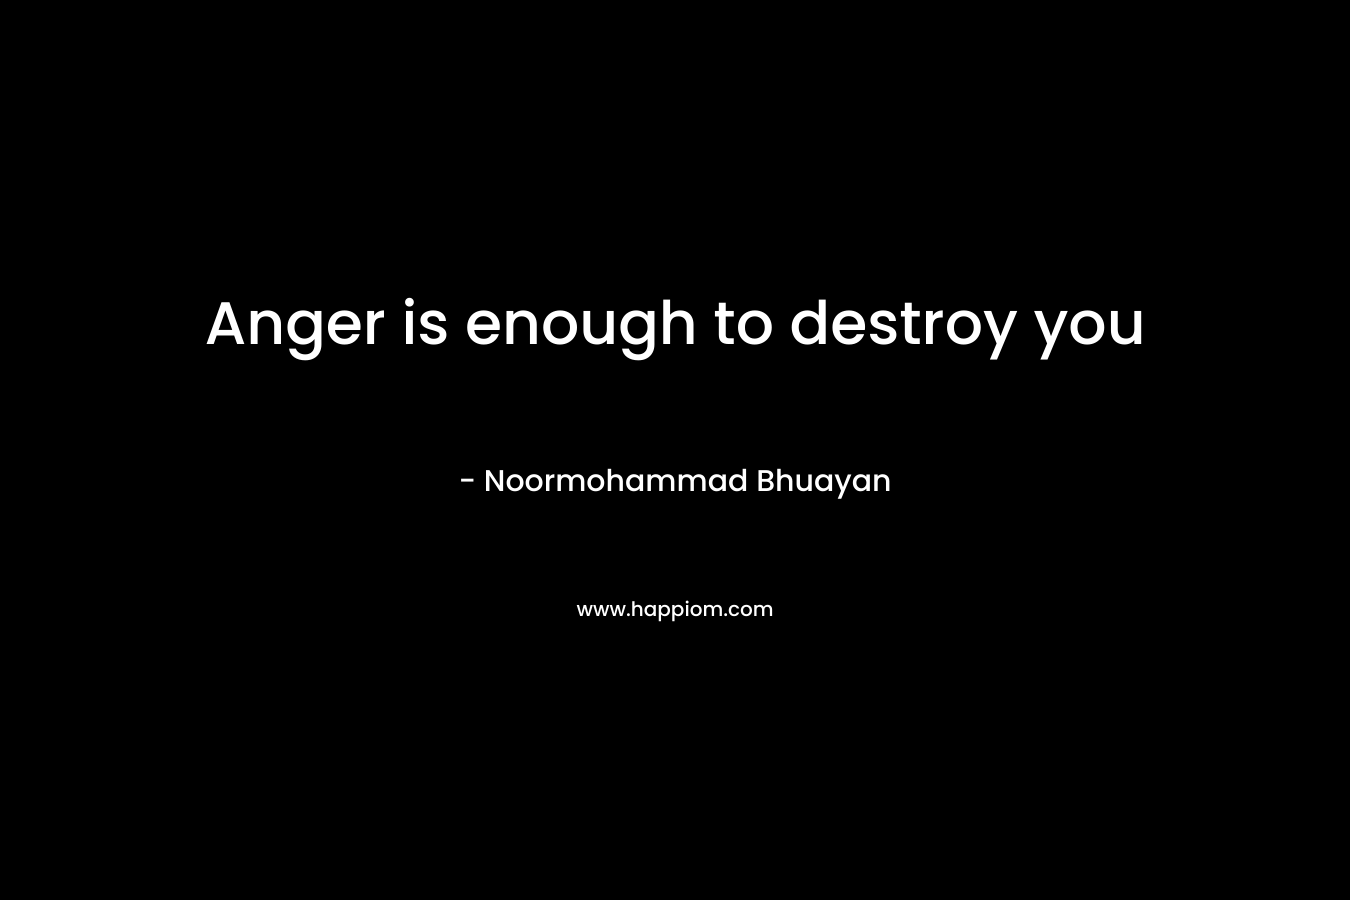 Anger is enough to destroy you – Noormohammad Bhuayan